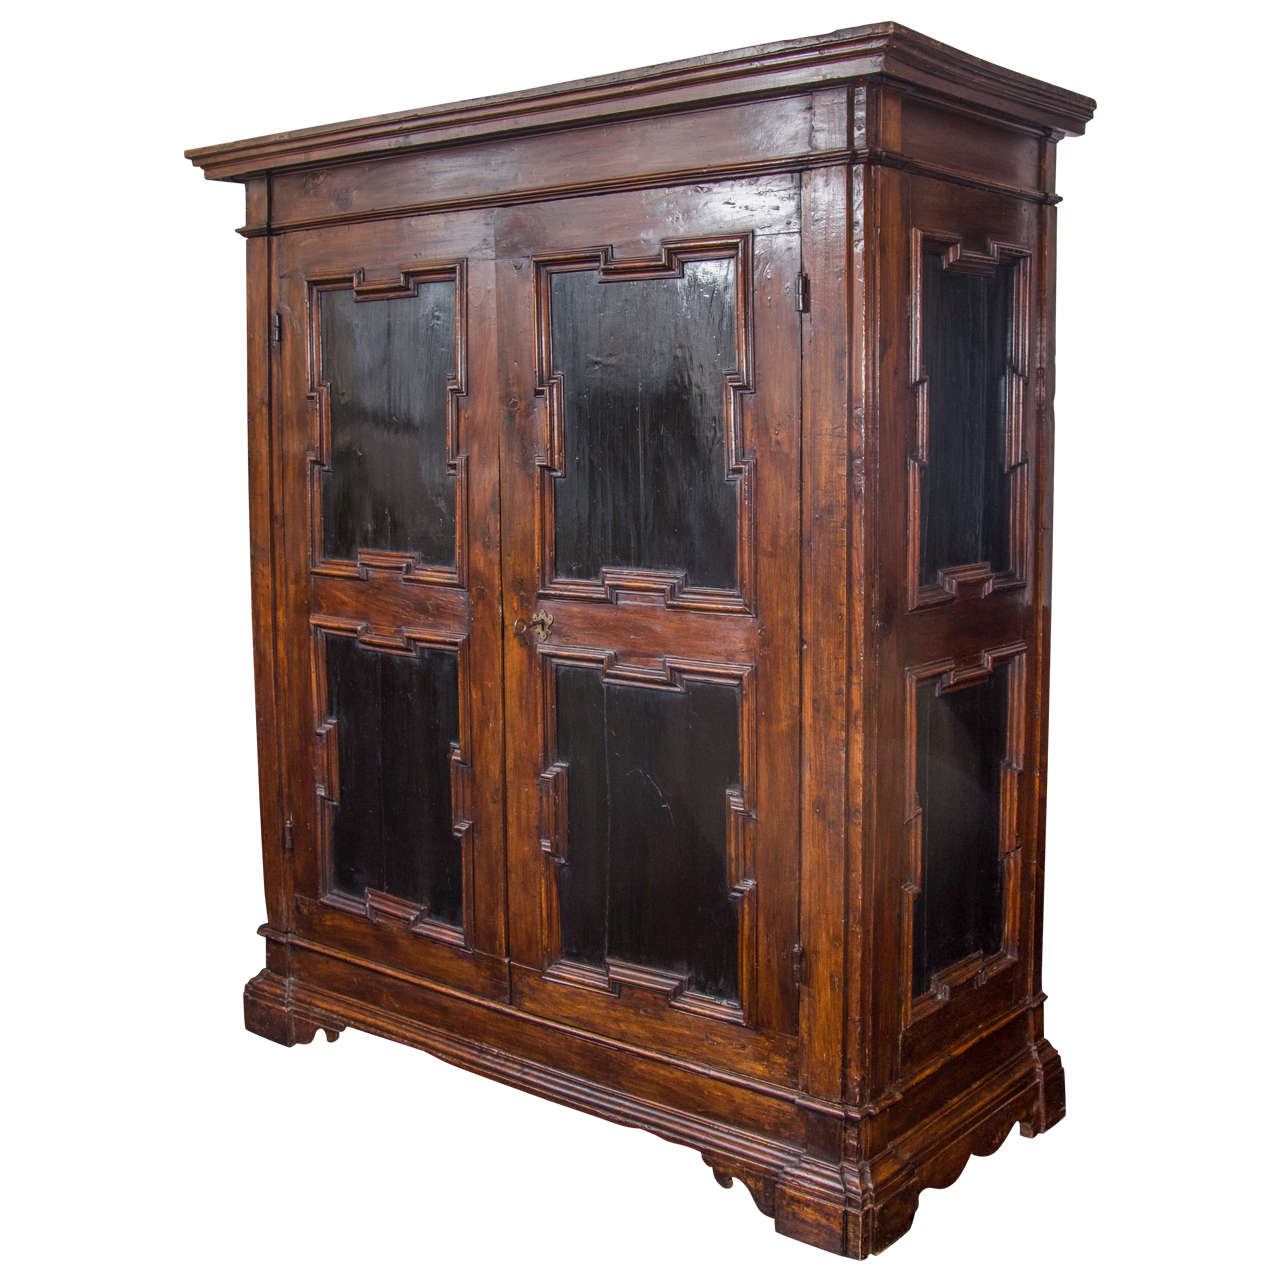 A large scale 18th century Italian walnut armoire with very clean modernist details including raised panels on the front doors and sides. The interior includes a center shelf and potential hanging capabilities.
Can be dismantled for shipping and